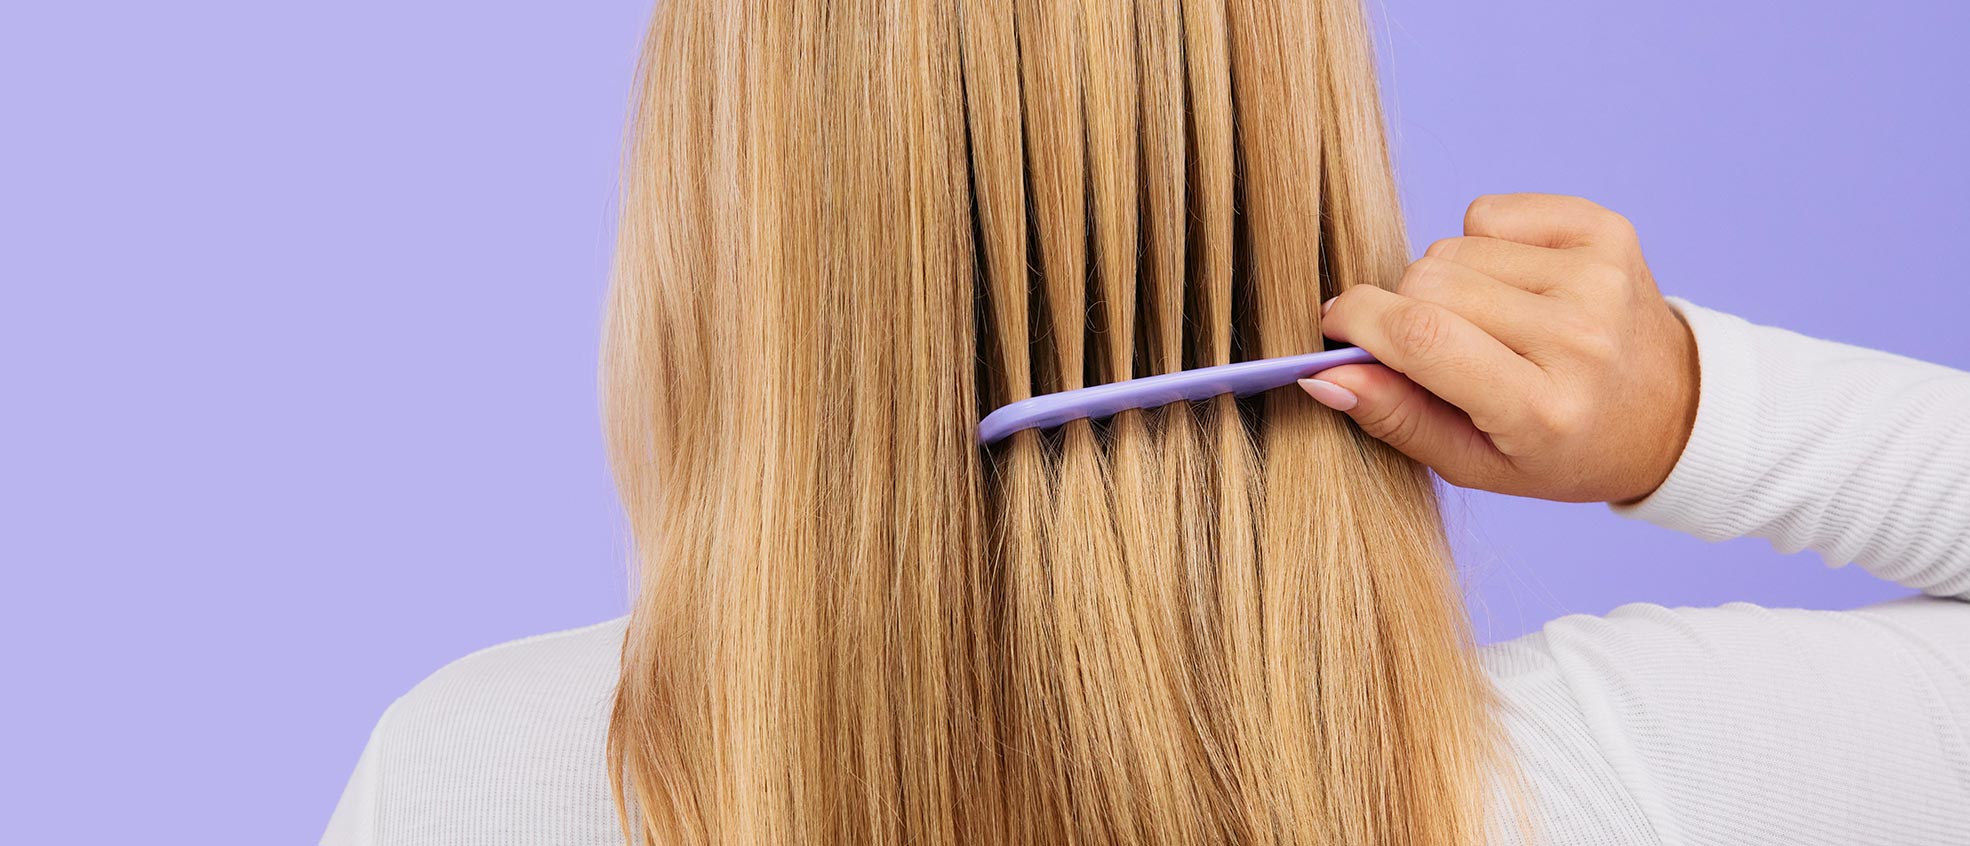 A blond woman's healthy hair being effortlessly combed with her right hand. Subject poses in front of a lavender color background.